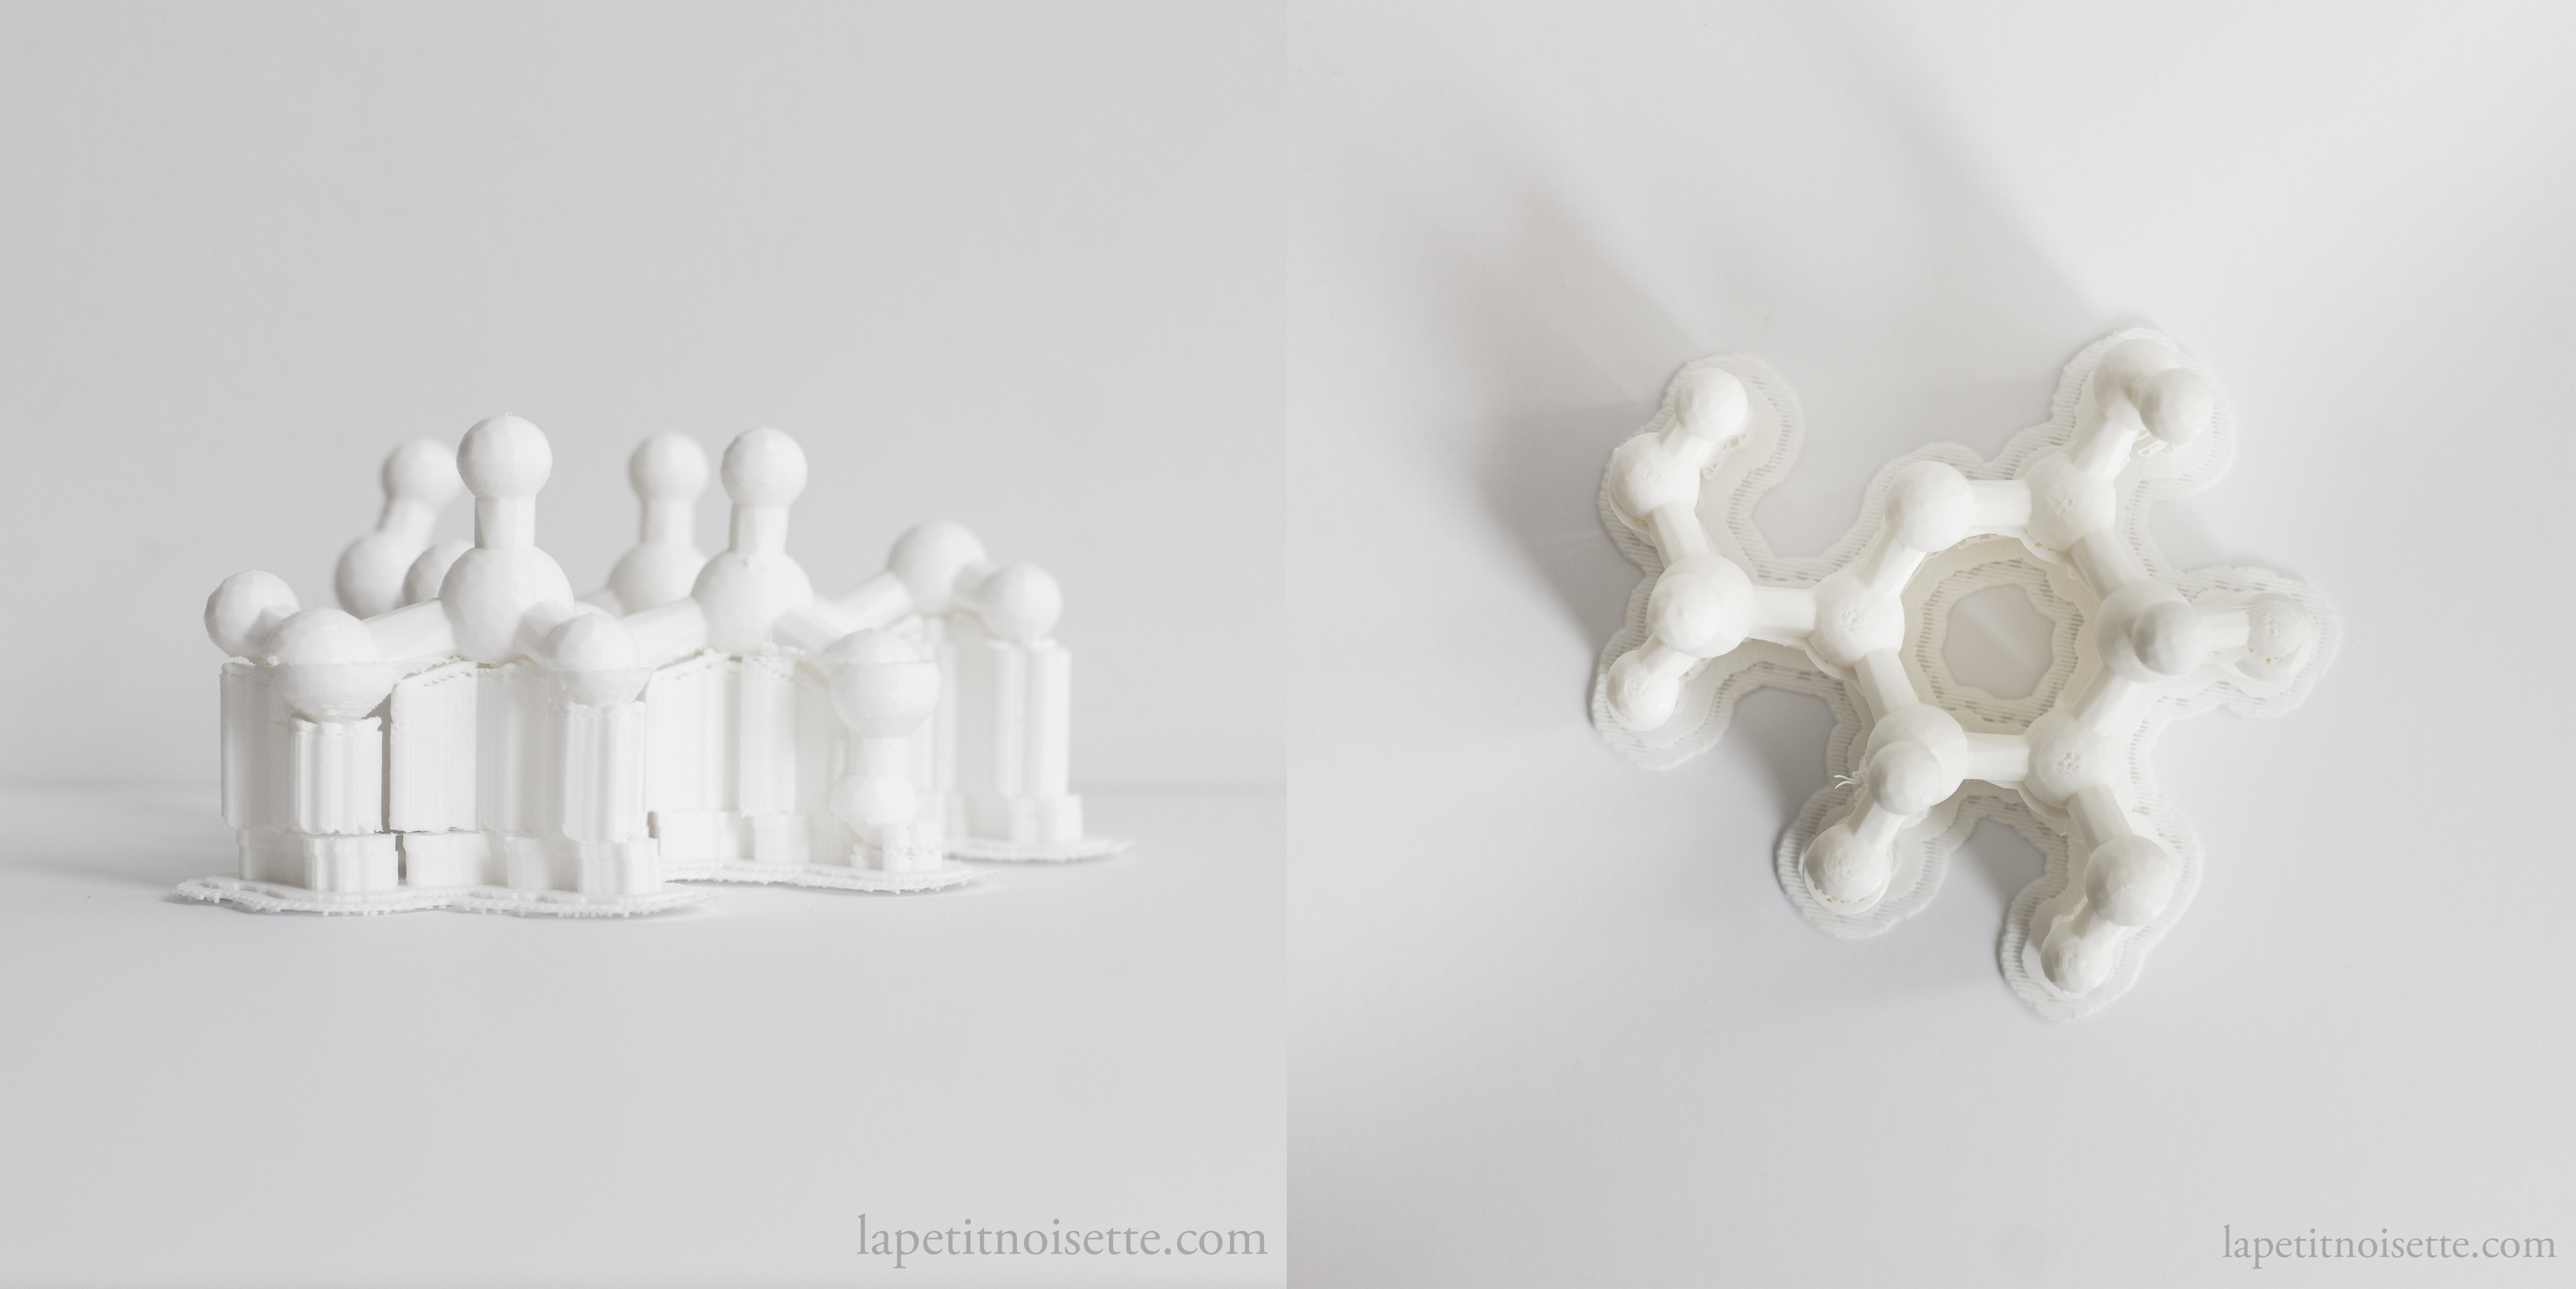 A 3D printed model of glucose